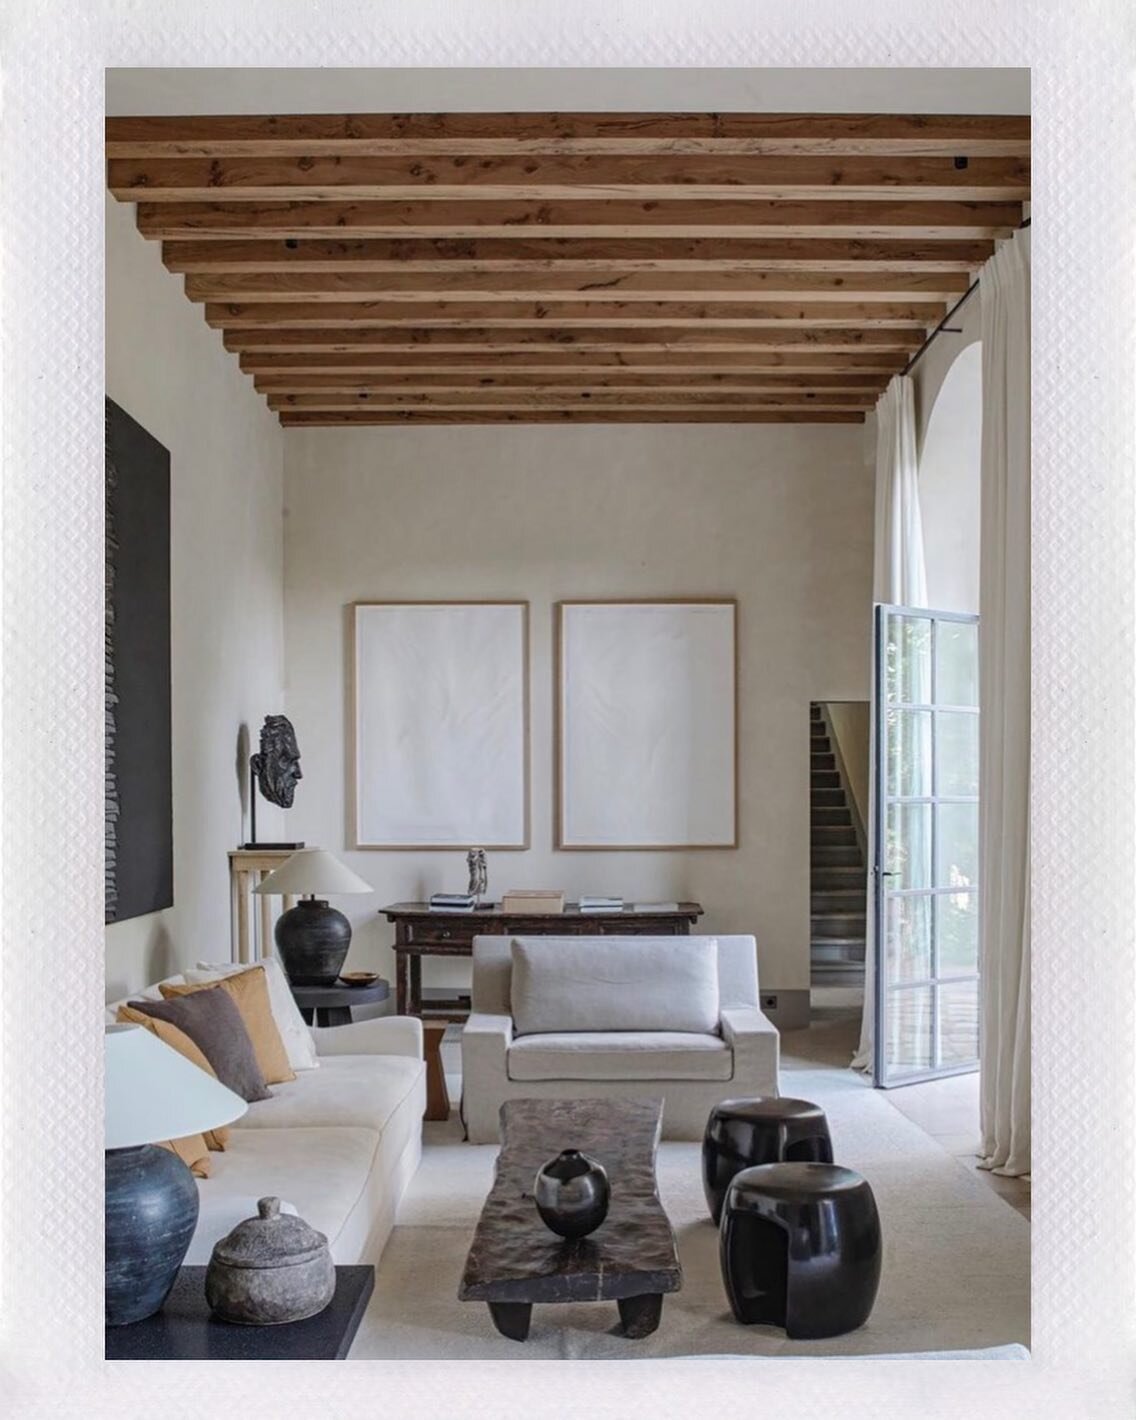 drawing inspiration for our southern highlands interior project from @gillesetboissier natural wood ceiling beams that accentuate the height of the living spaces, interior design &amp; styling moodboards for the home are now up in stories ✨#interiord